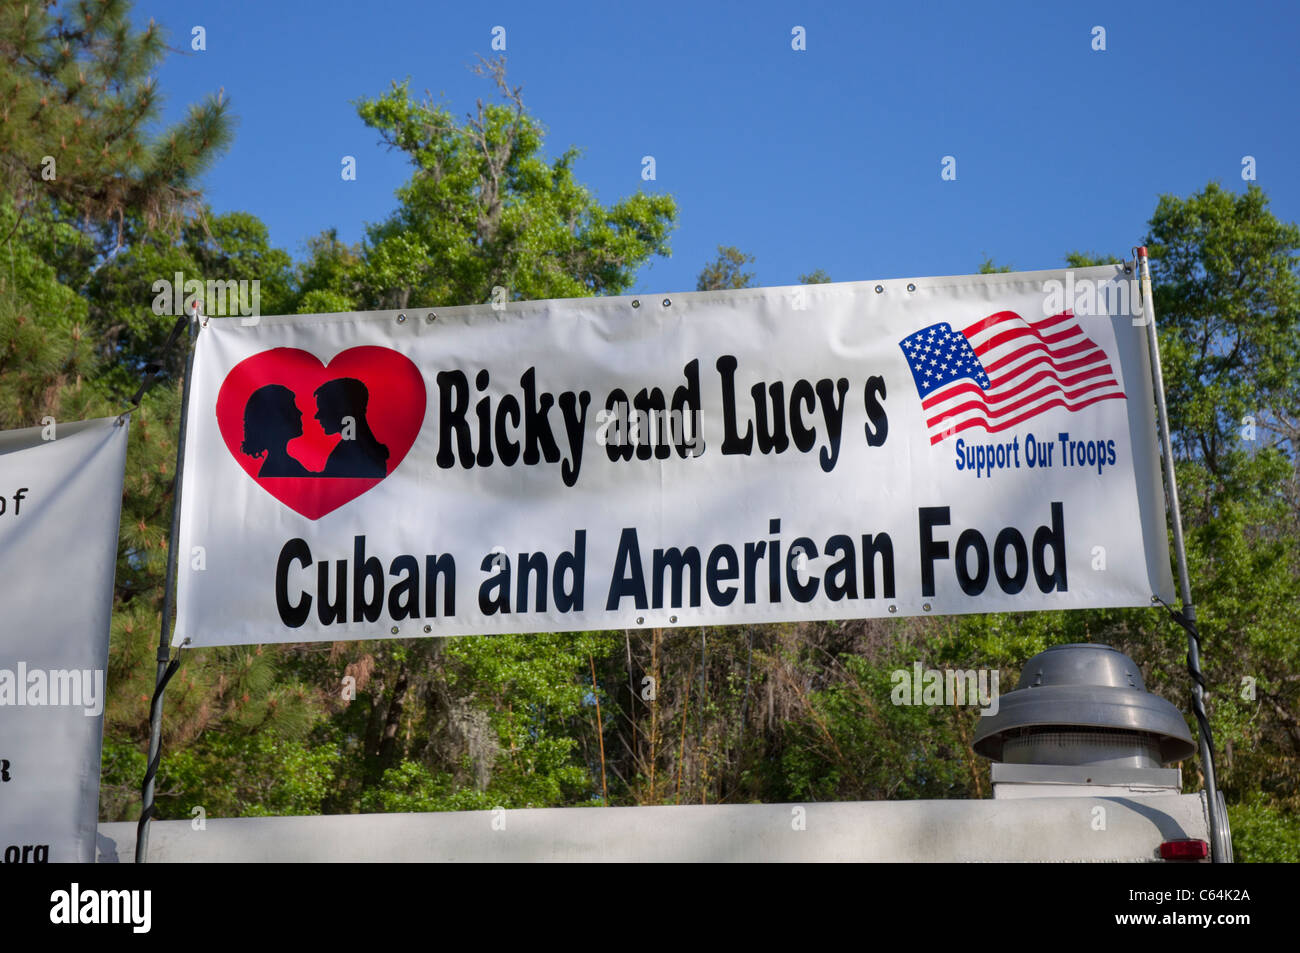 Kanapaha Gardens Spring Festival Gainesville Florida Ricky and Lucy of TV fame Cuban and American food kiosk Stock Photo